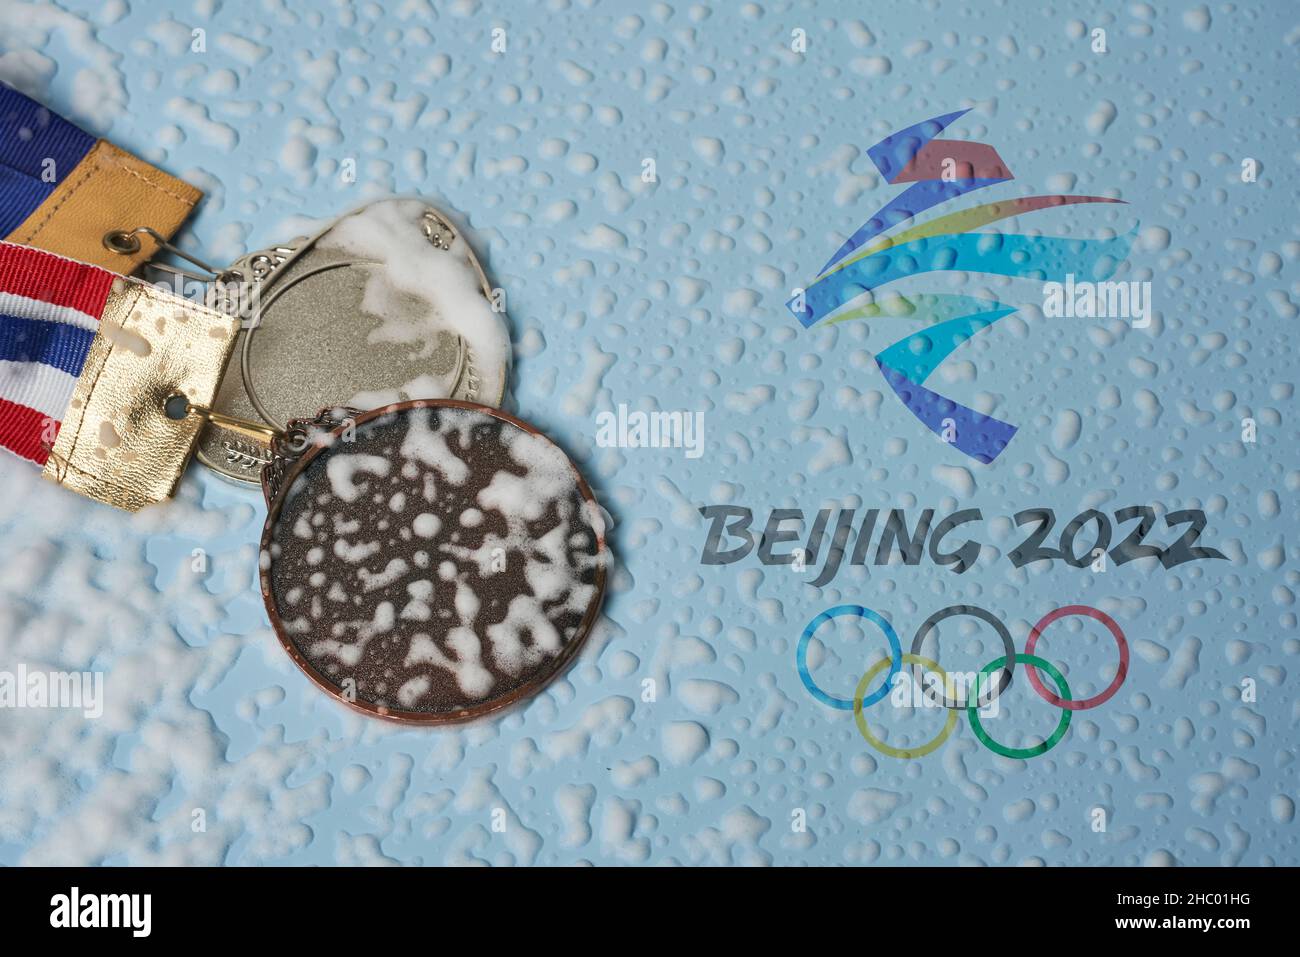 14 December 2021 - Los Angeles, USA: Olympic medals and Beijing 2022 Olympic Games symbol. Winning medals at 2022 Winter Olympics in Beijing, China Stock Photo